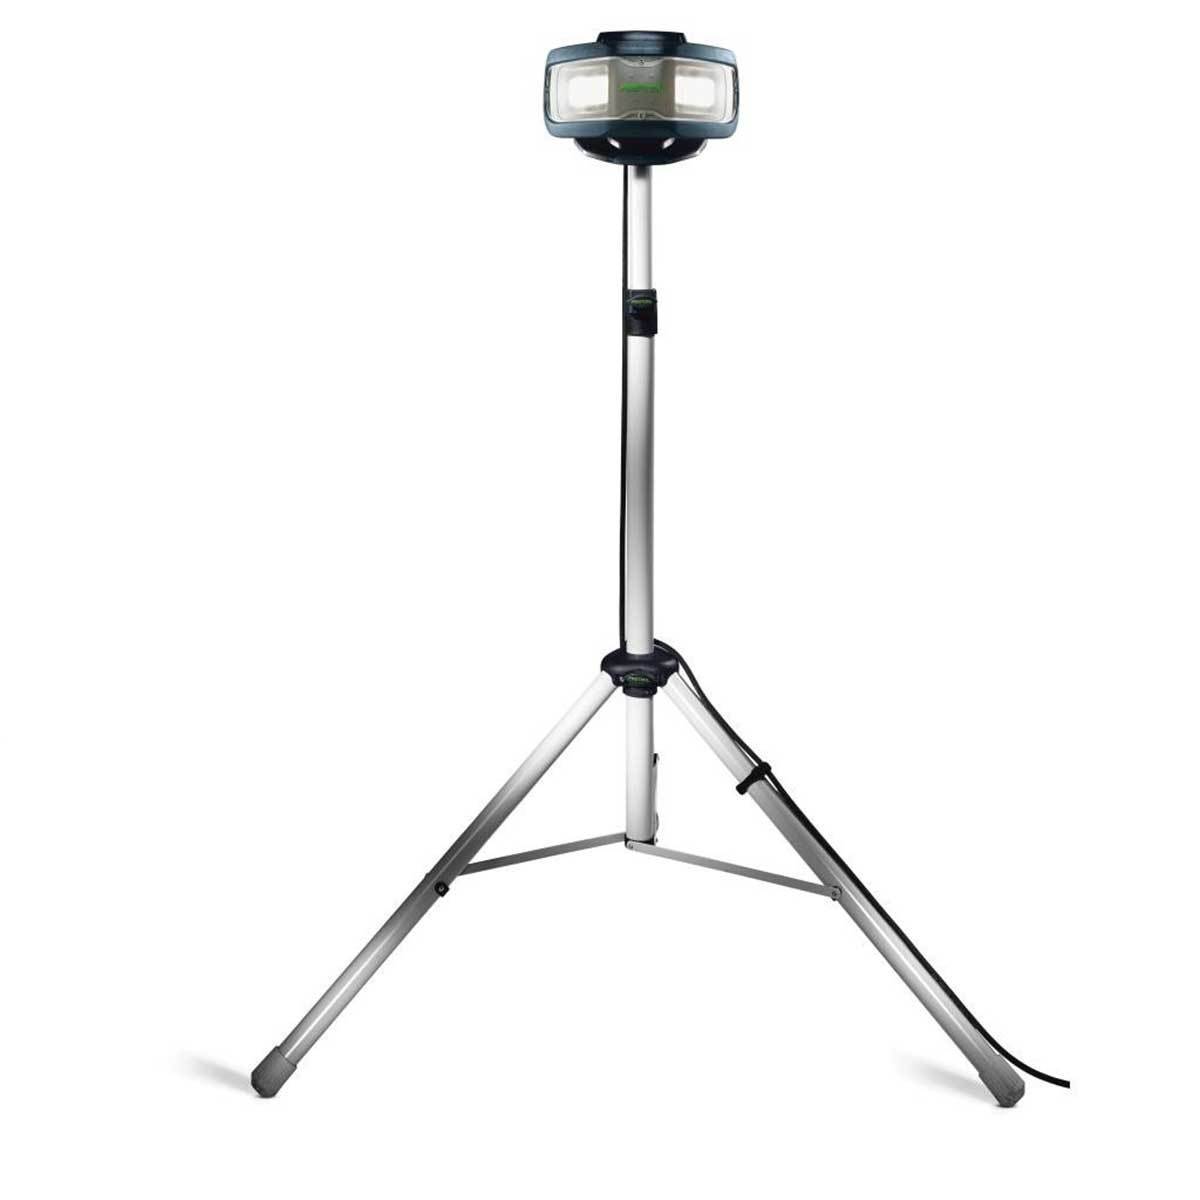 SysLite Duo on optional tripod allows the light to be positioned higher up for better illumination of large areas.